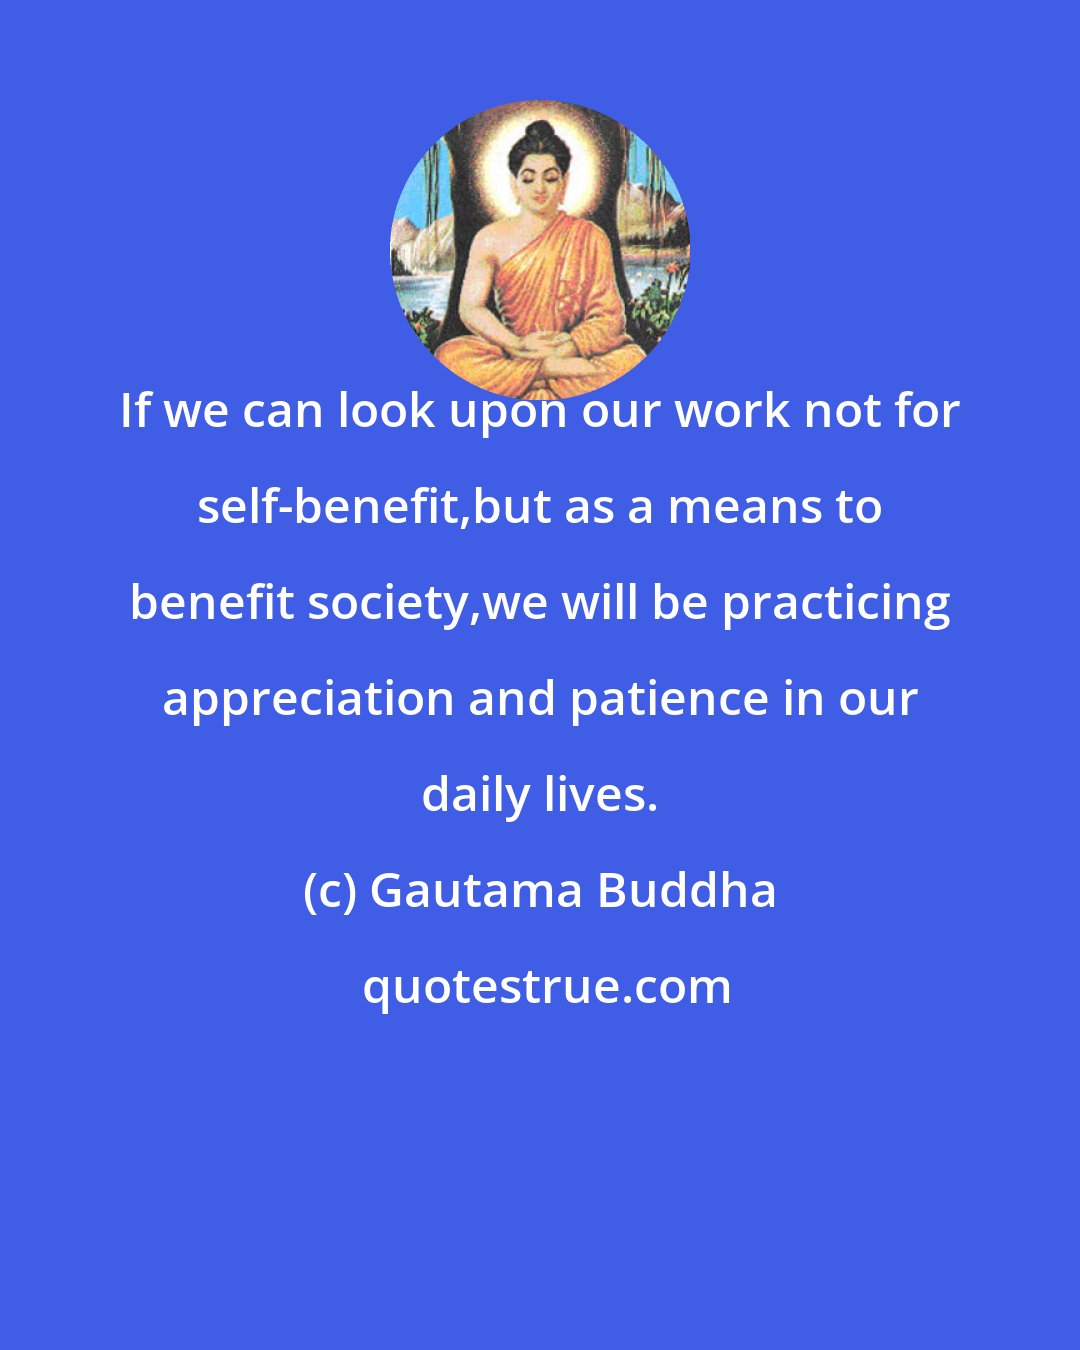 Gautama Buddha: If we can look upon our work not for self-benefit,but as a means to benefit society,we will be practicing appreciation and patience in our daily lives.